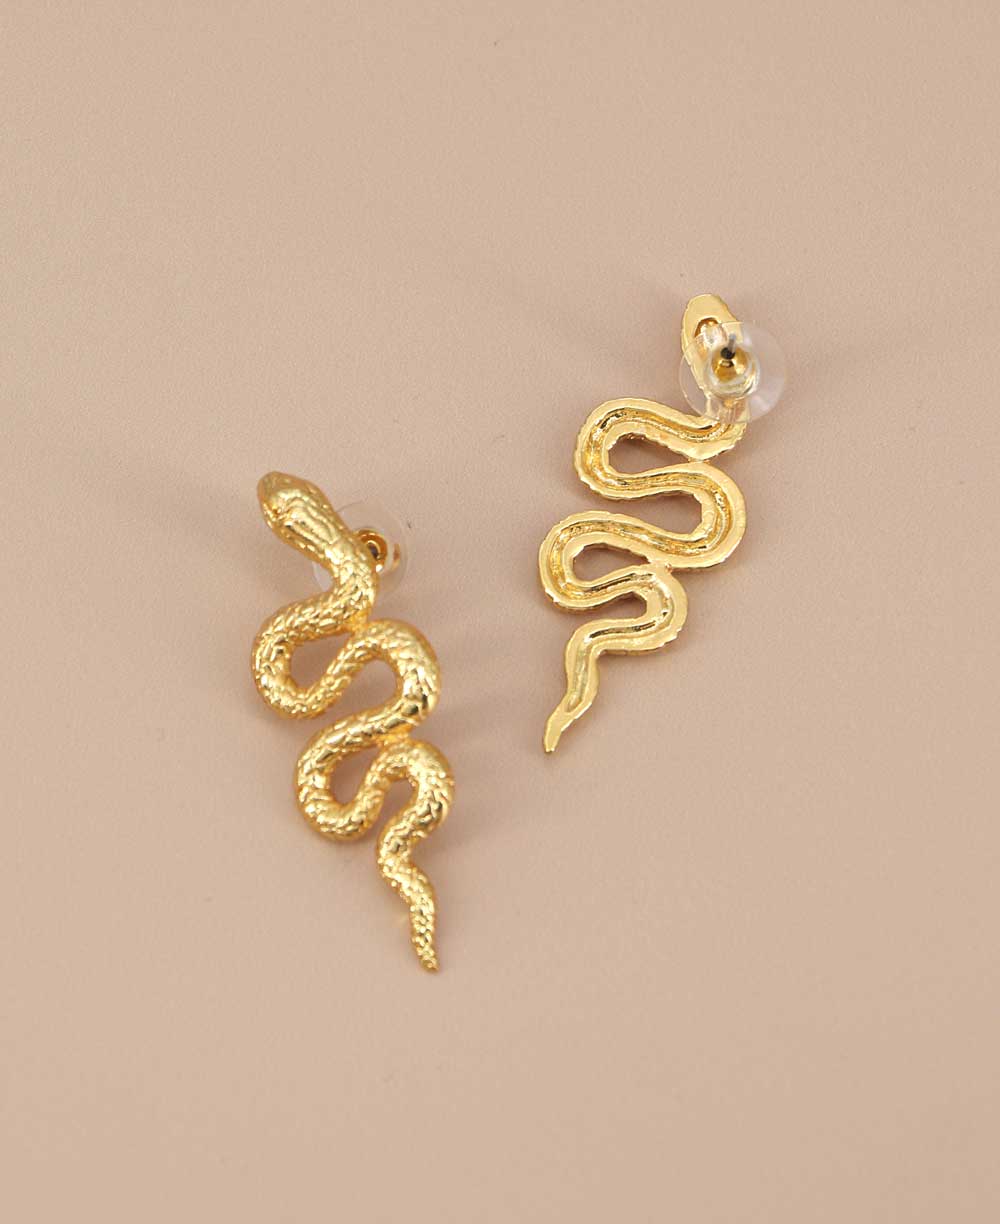 Gold plated serpent shaped earrings with etched detailing